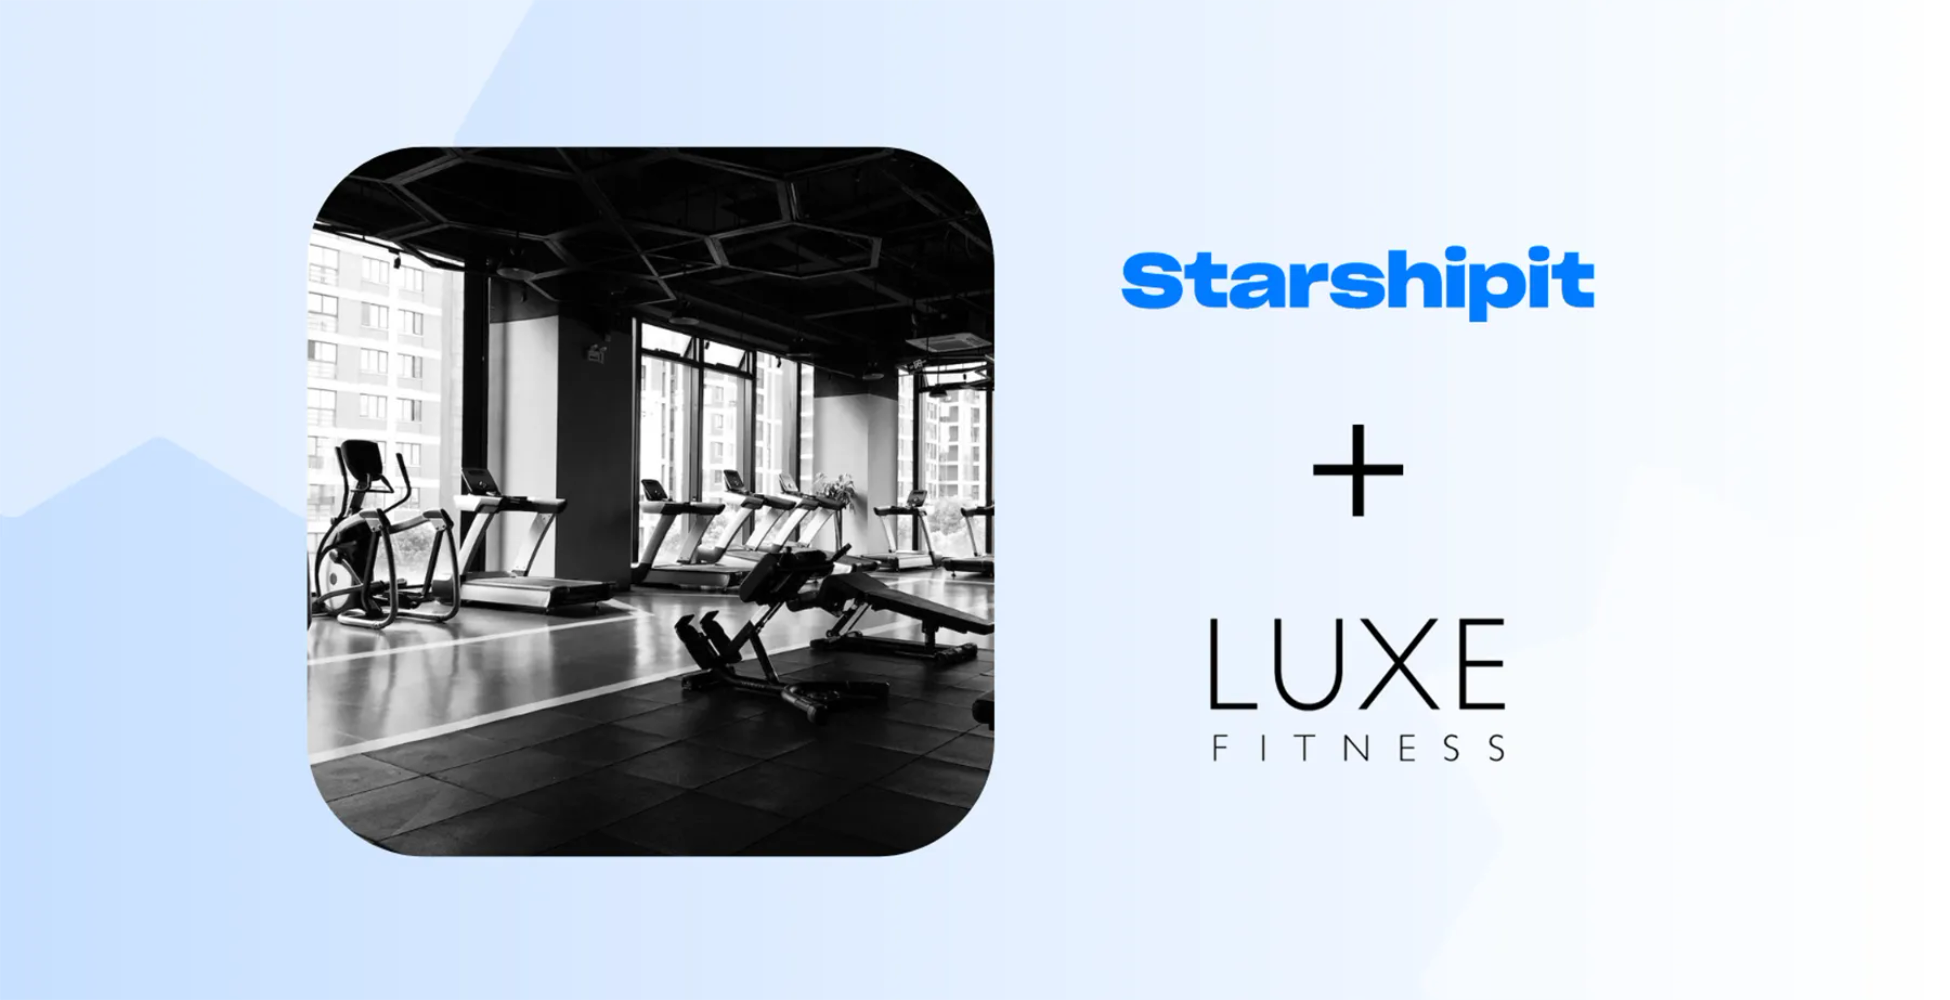 Starshipit and Luxe Fitness case study